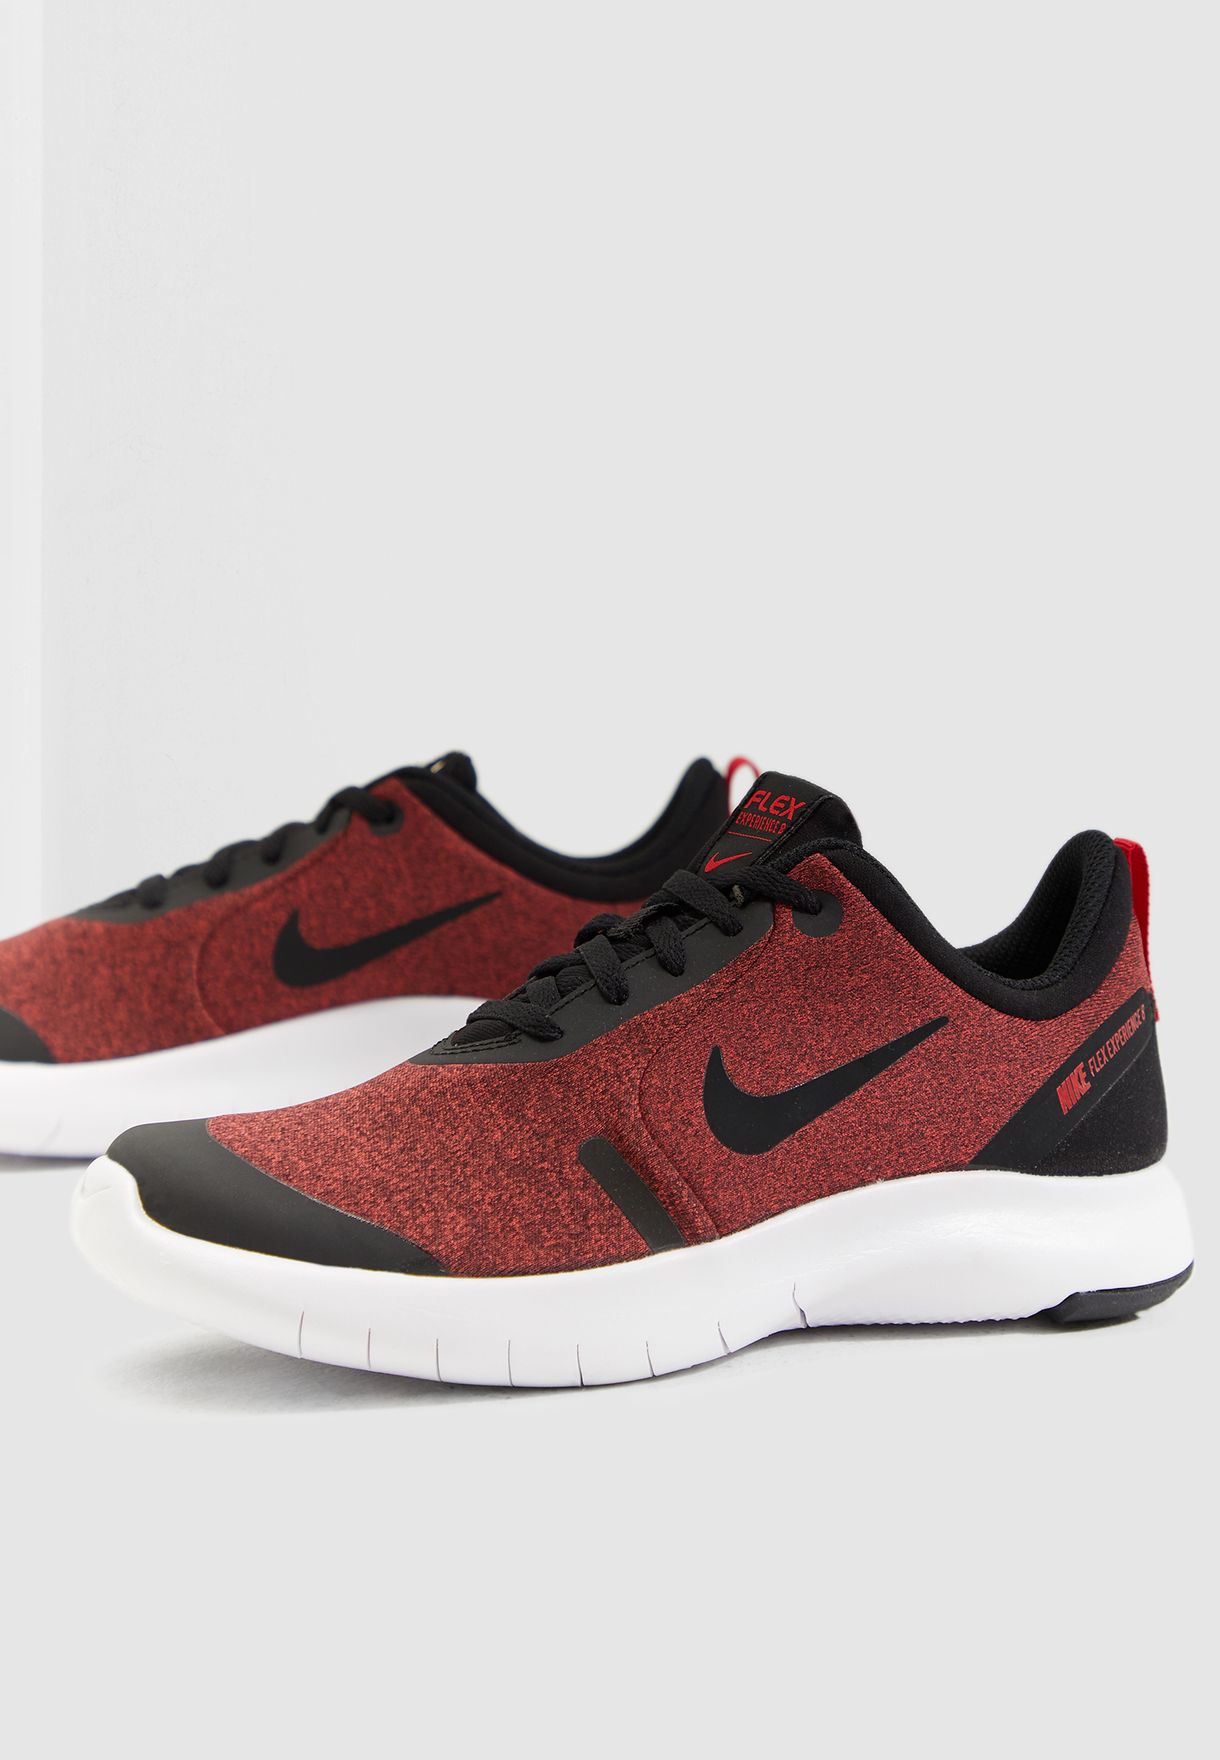 nike flex experience red